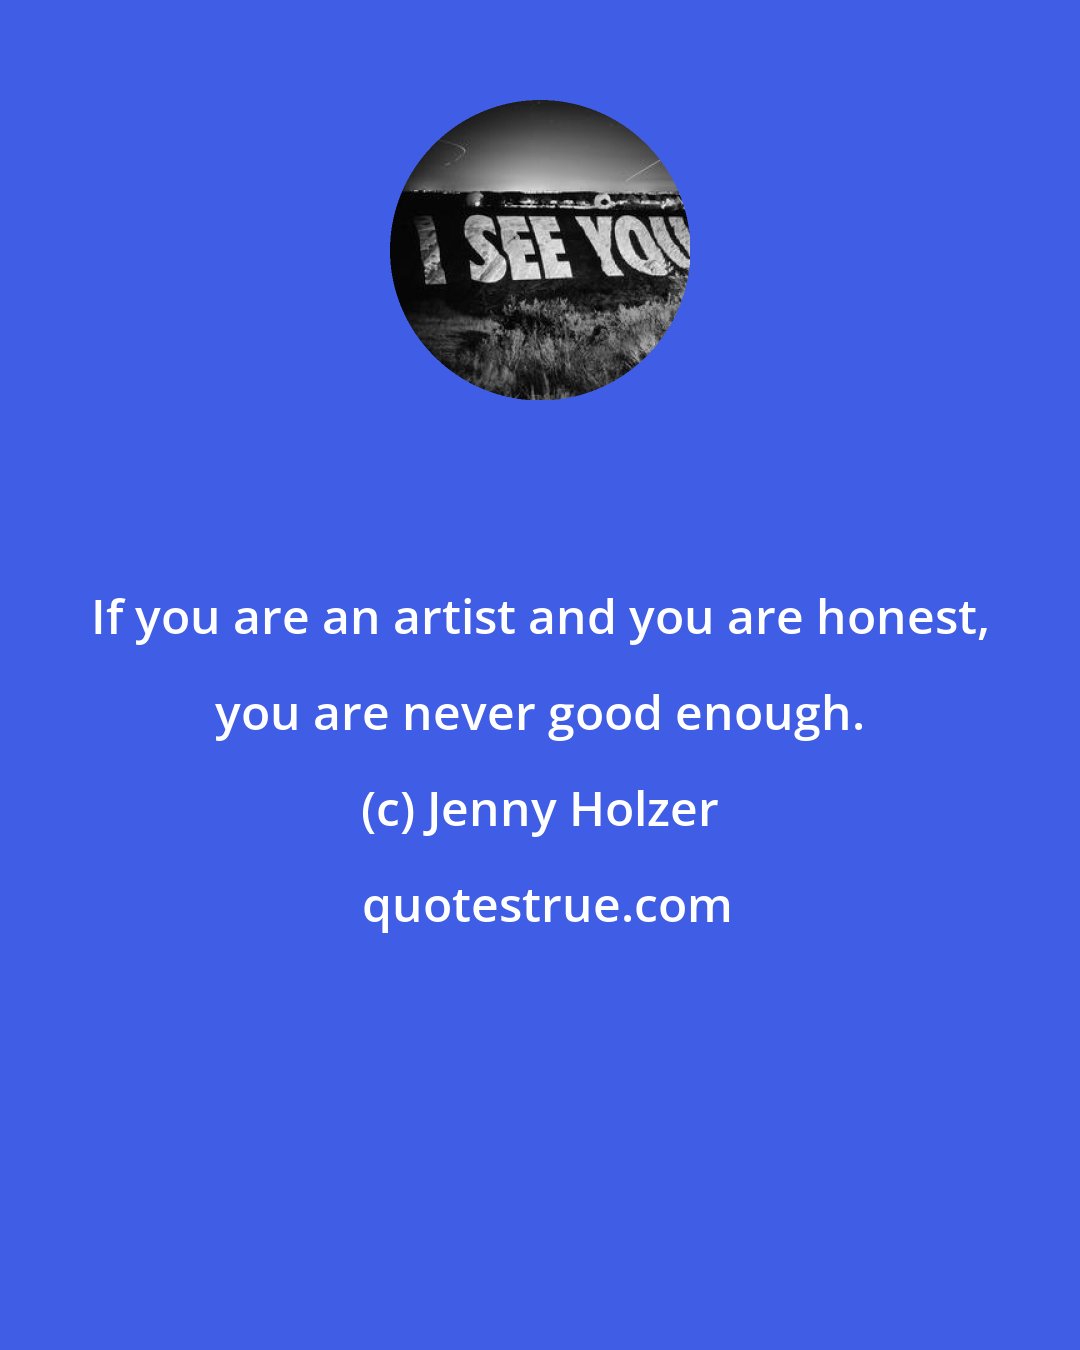 Jenny Holzer: If you are an artist and you are honest, you are never good enough.